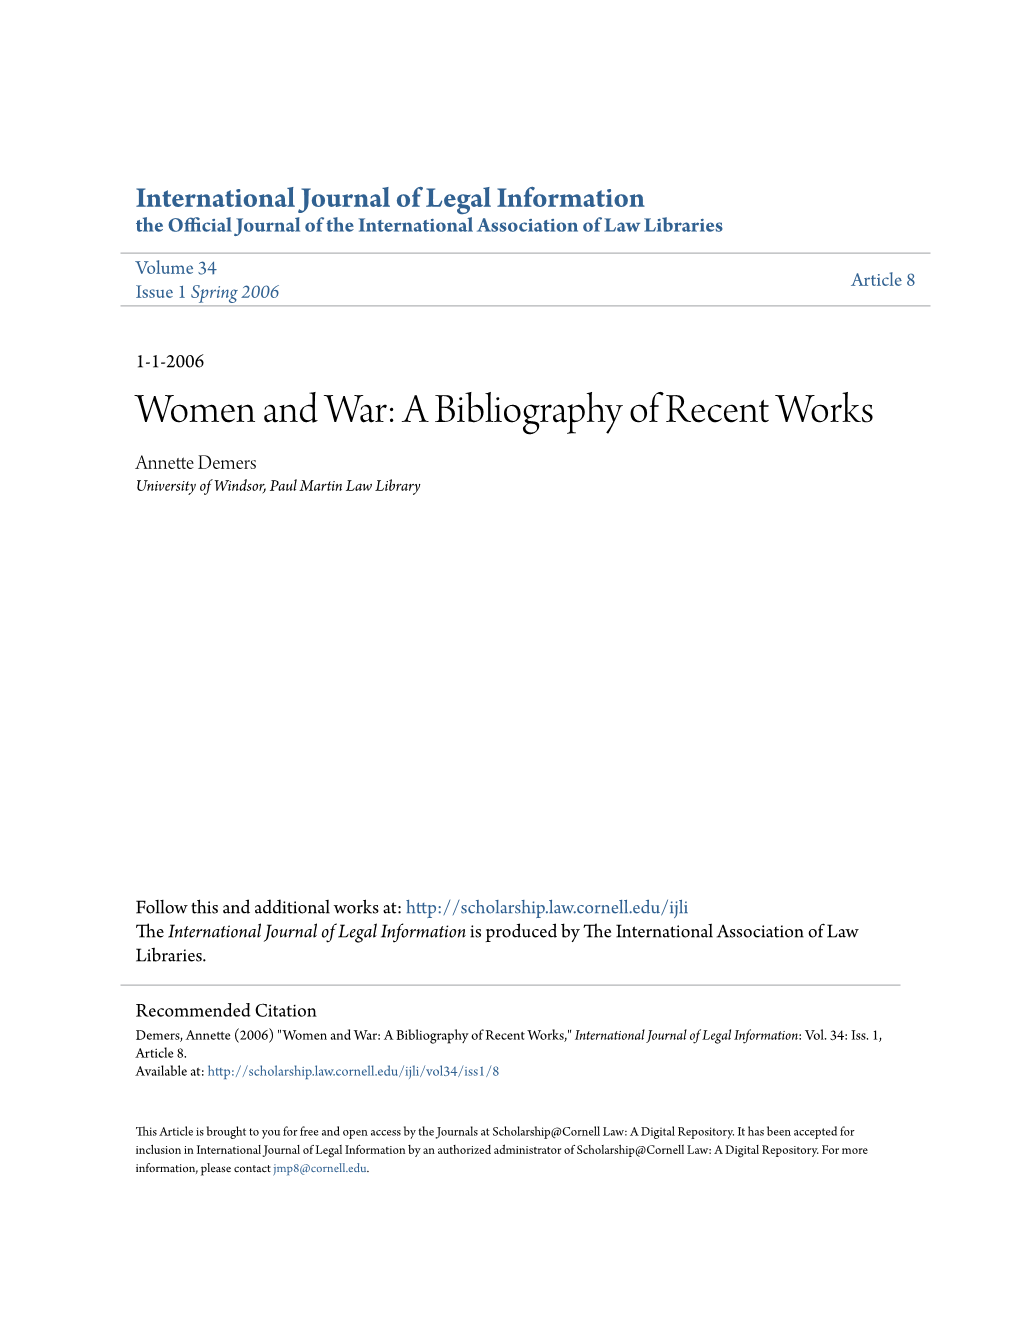 Women and War: a Bibliography of Recent Works Annette Demers University of Windsor, Paul Martin Law Library